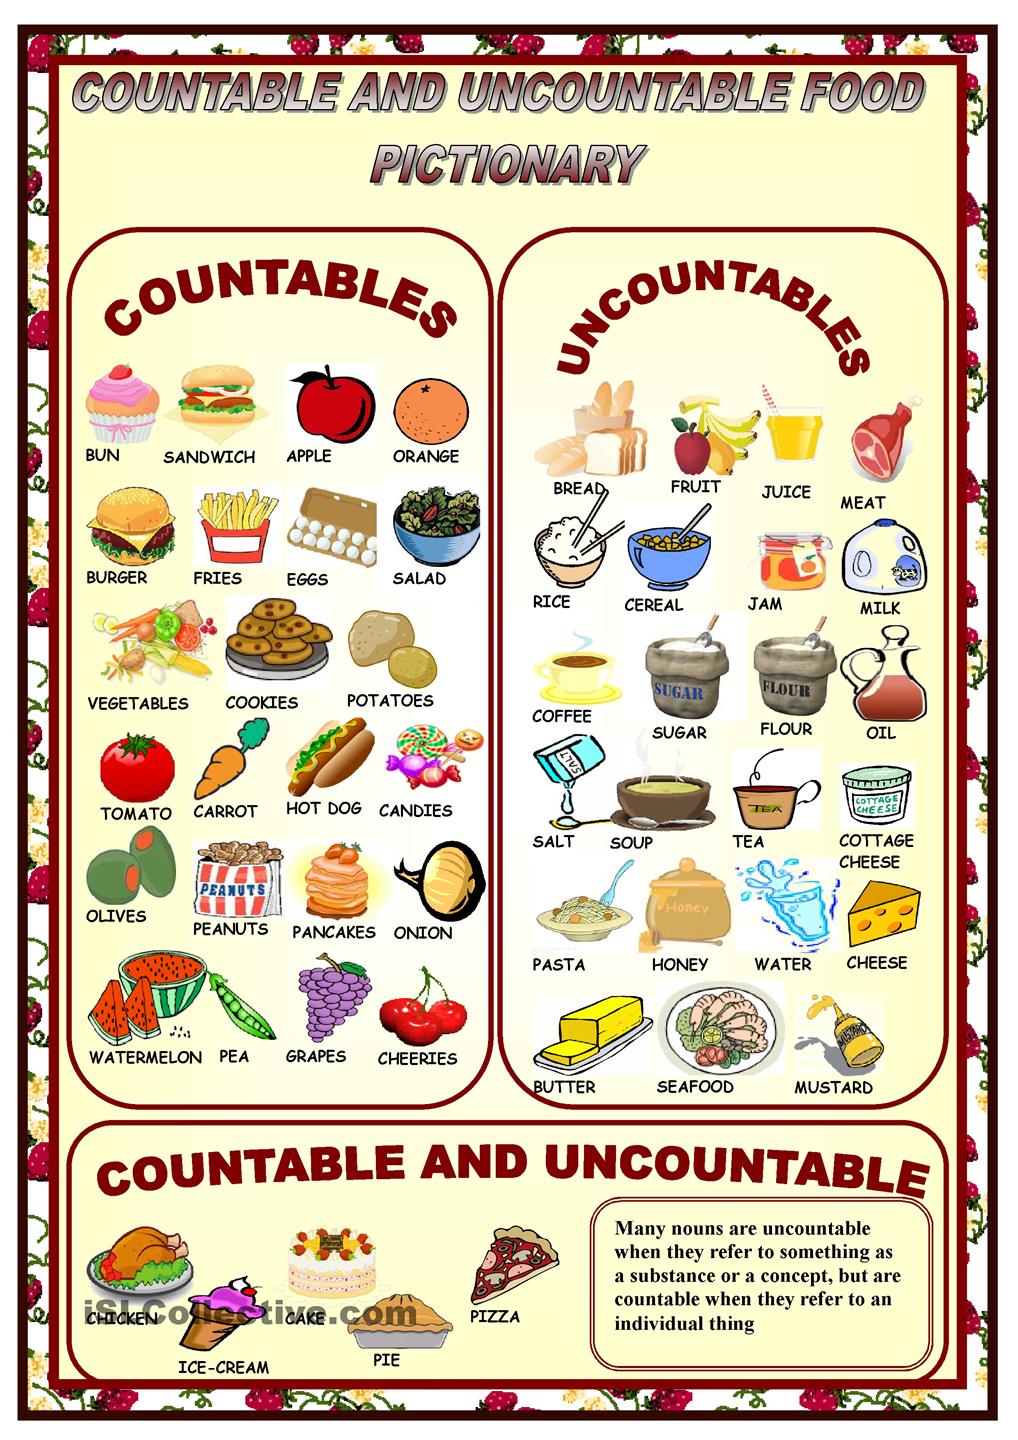 countable and uncountable nouns presentation